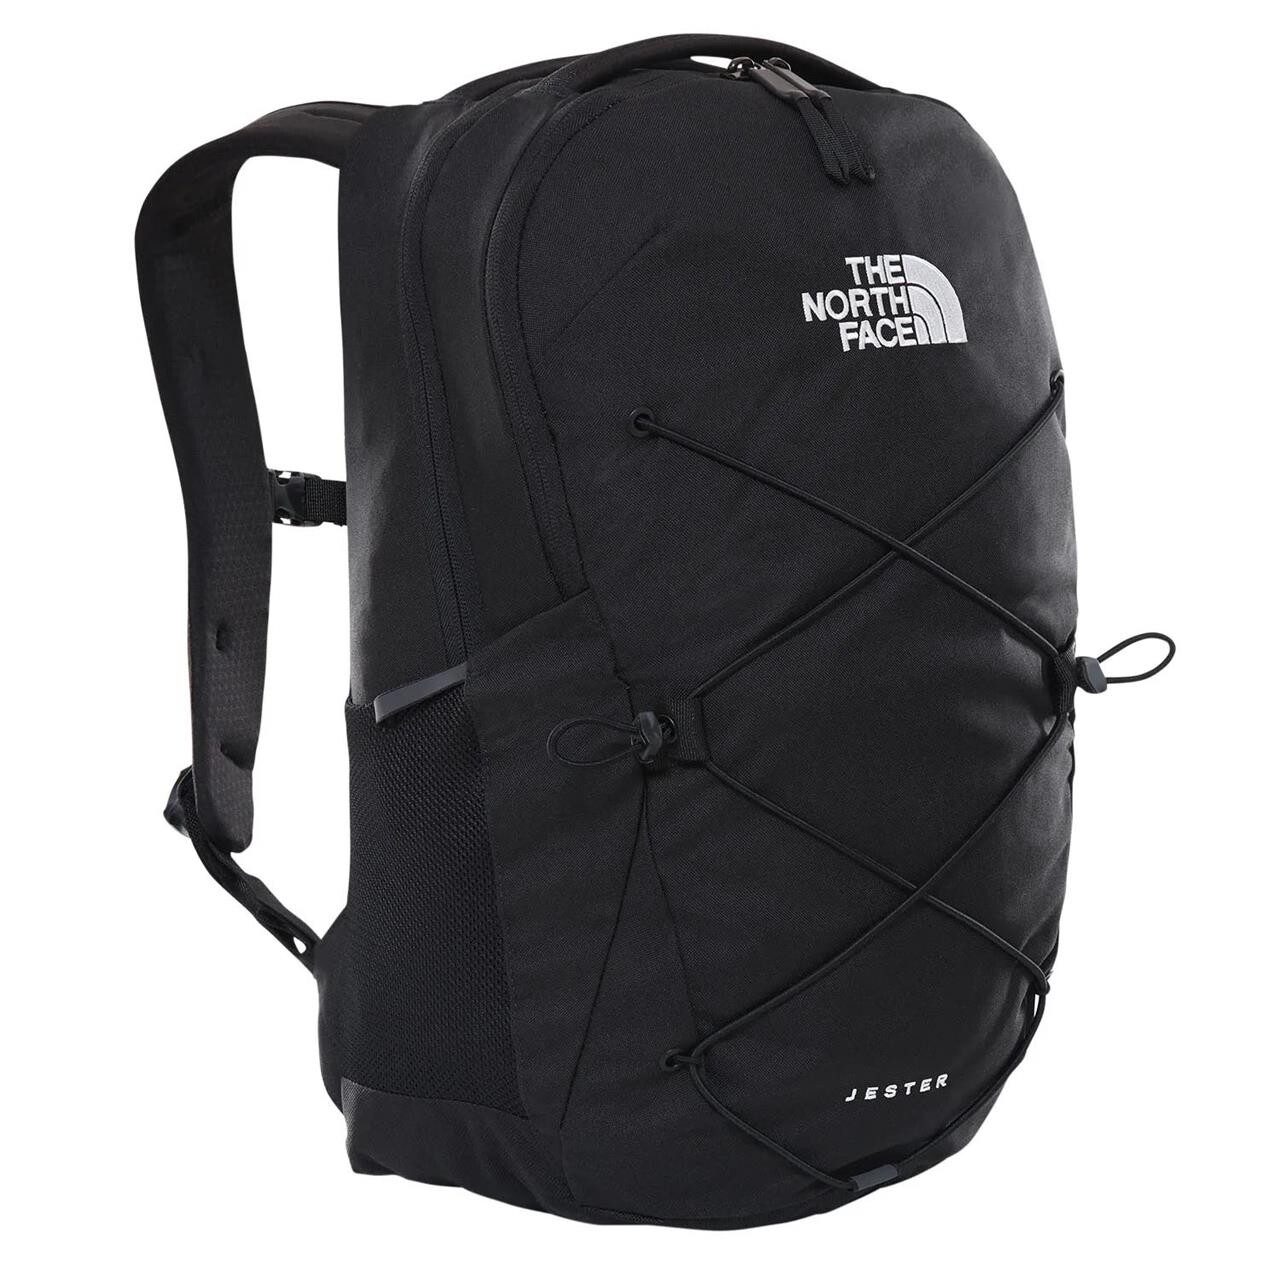 12: The North Face Jester (Sort (TNF BLACK) ONE SIZE)